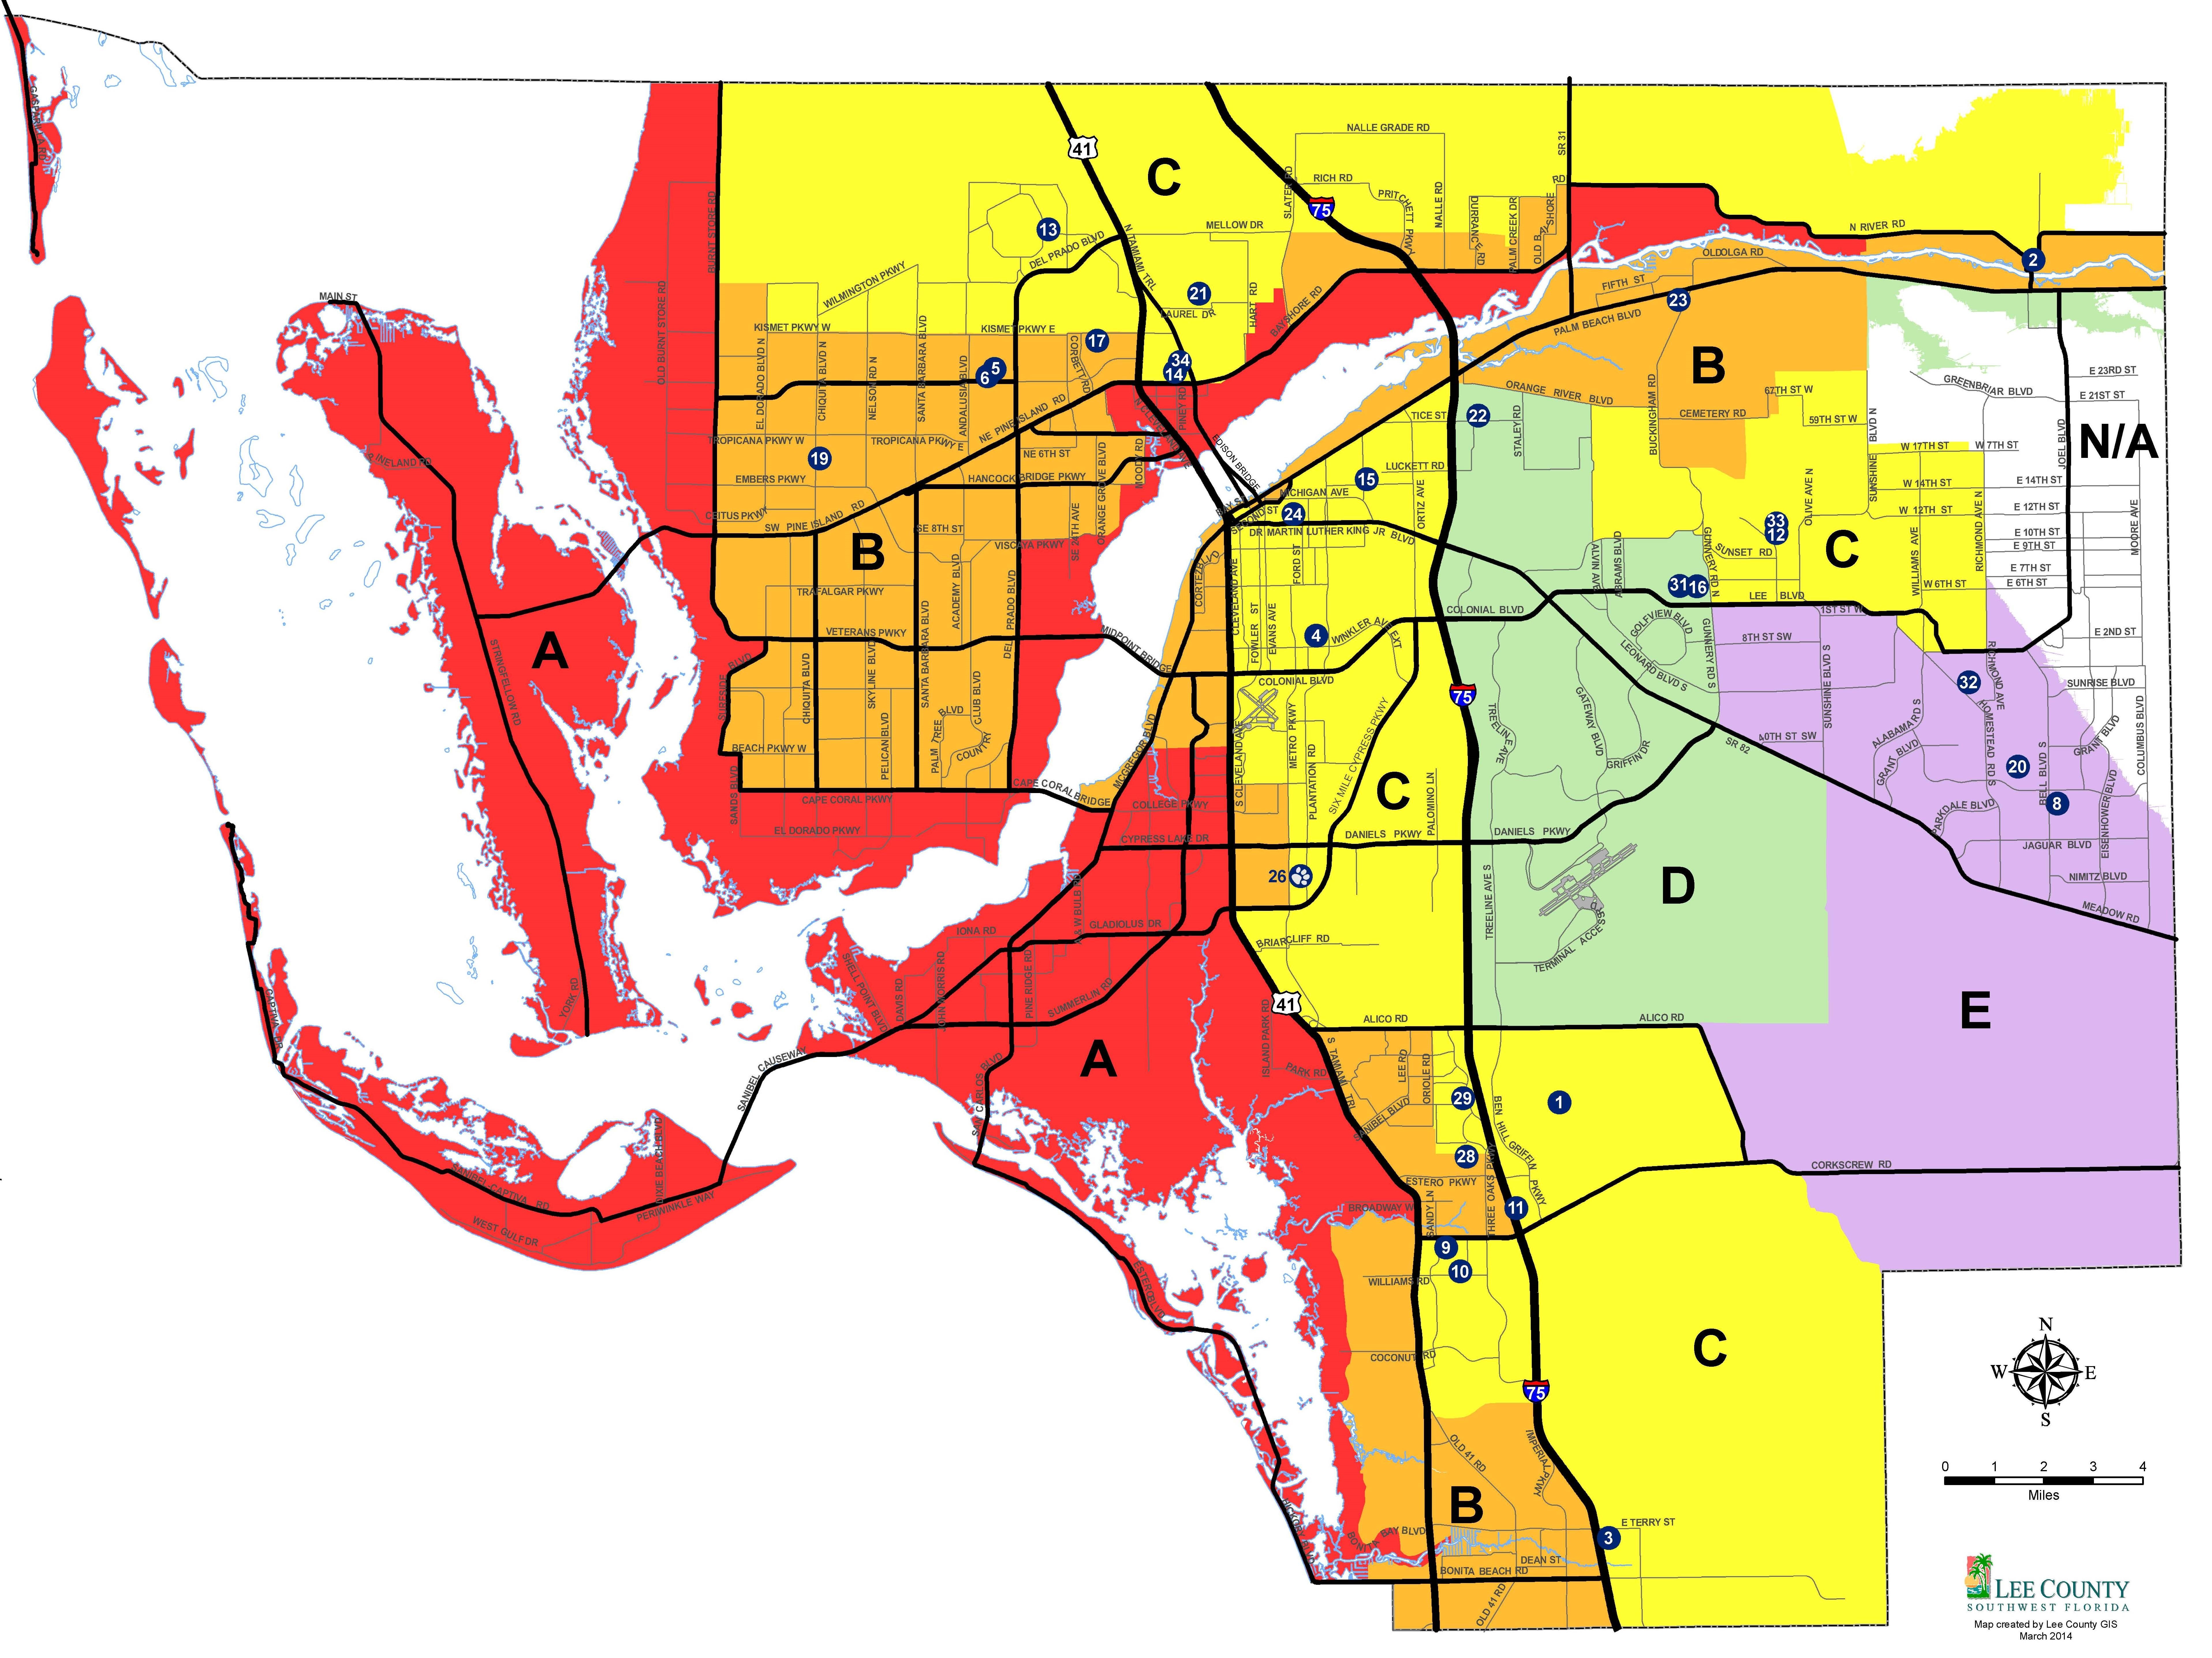 Click here to view Evacuation zones, Routes and Shelters Map